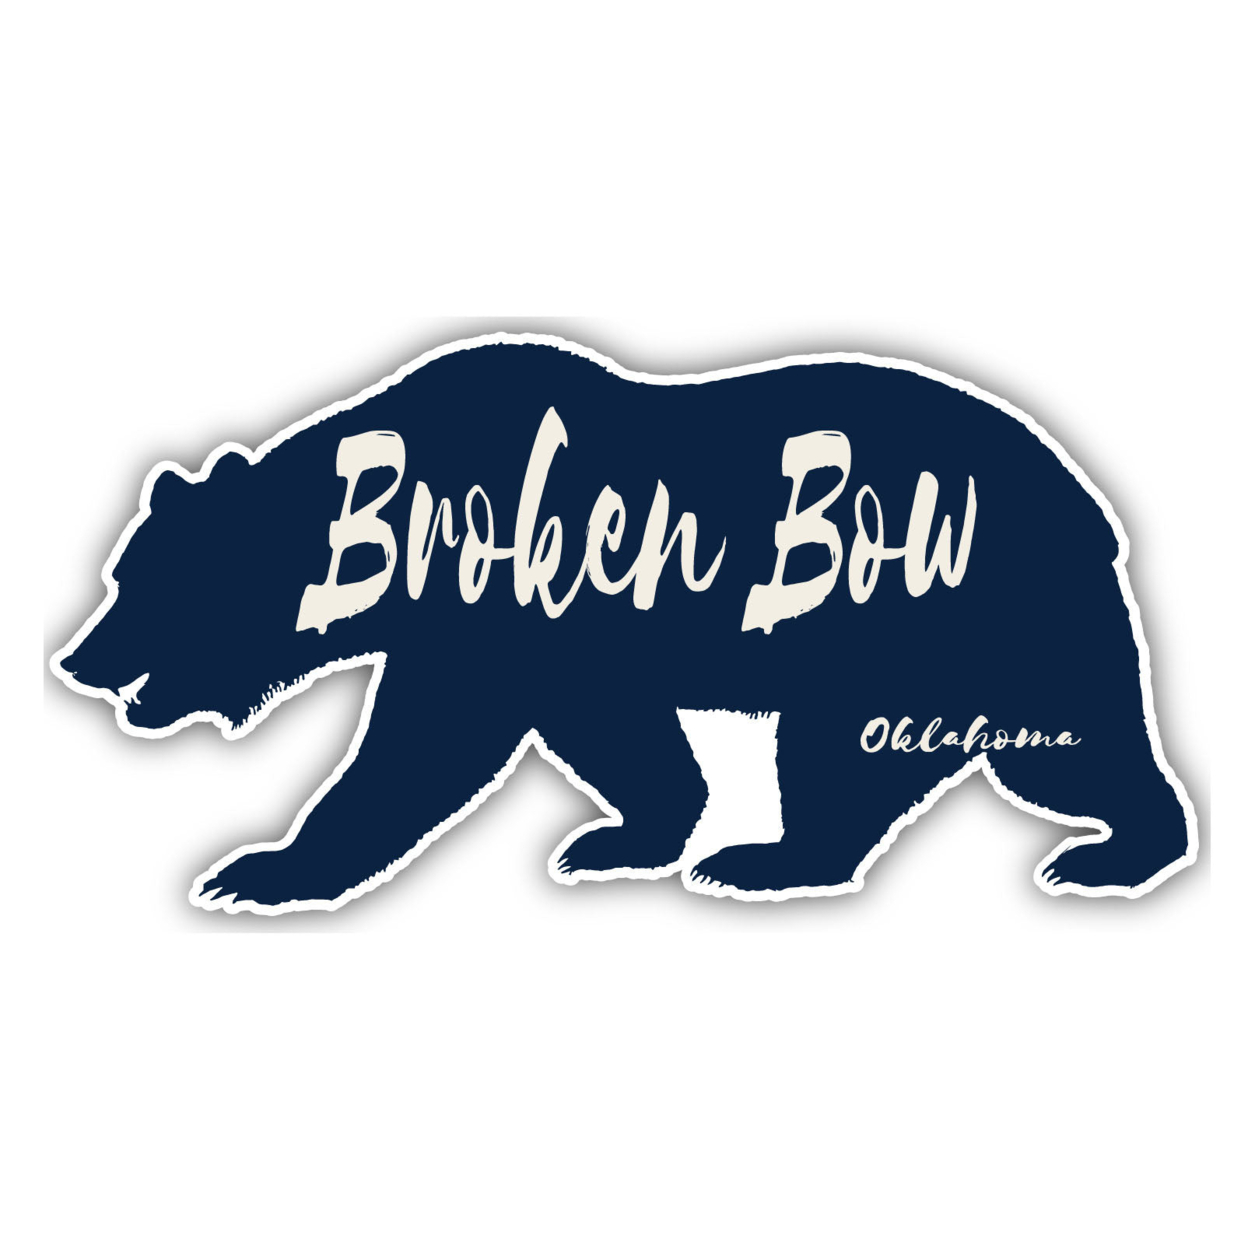 Broken Bow Oklahoma Souvenir Decorative Stickers (Choose Theme And Size) - 4-Pack, 10-Inch, Bear